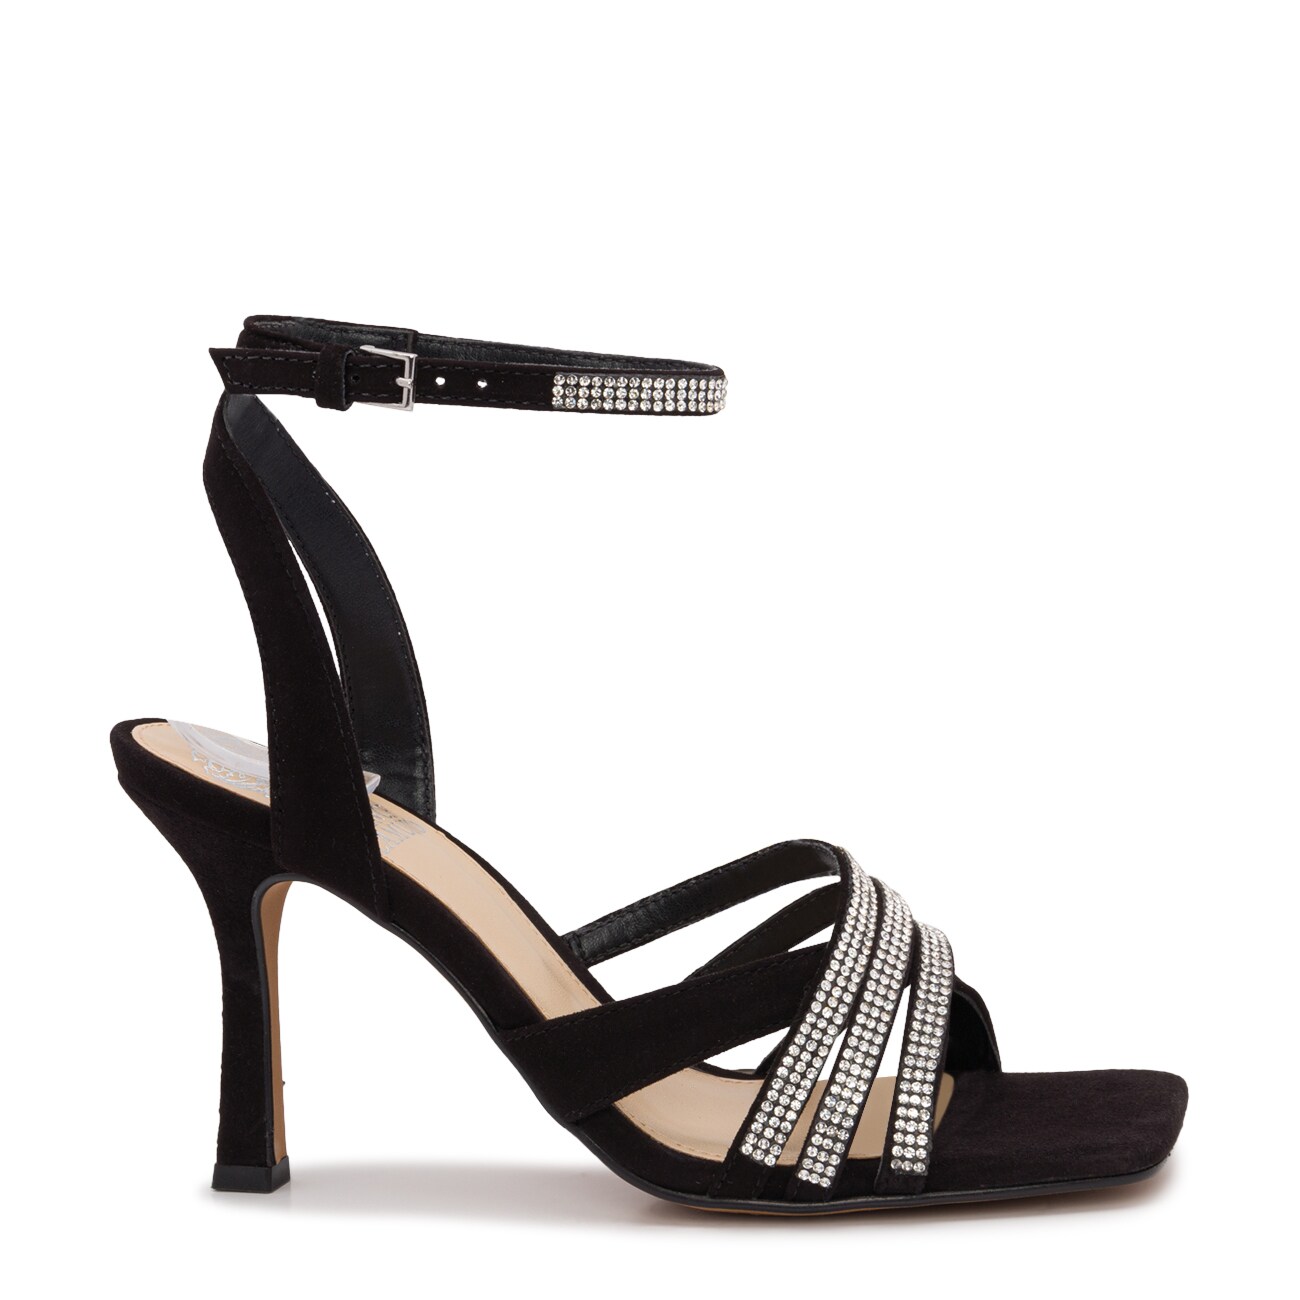 Vince Camuto Brevern Evening Sandal | The Shoe Company